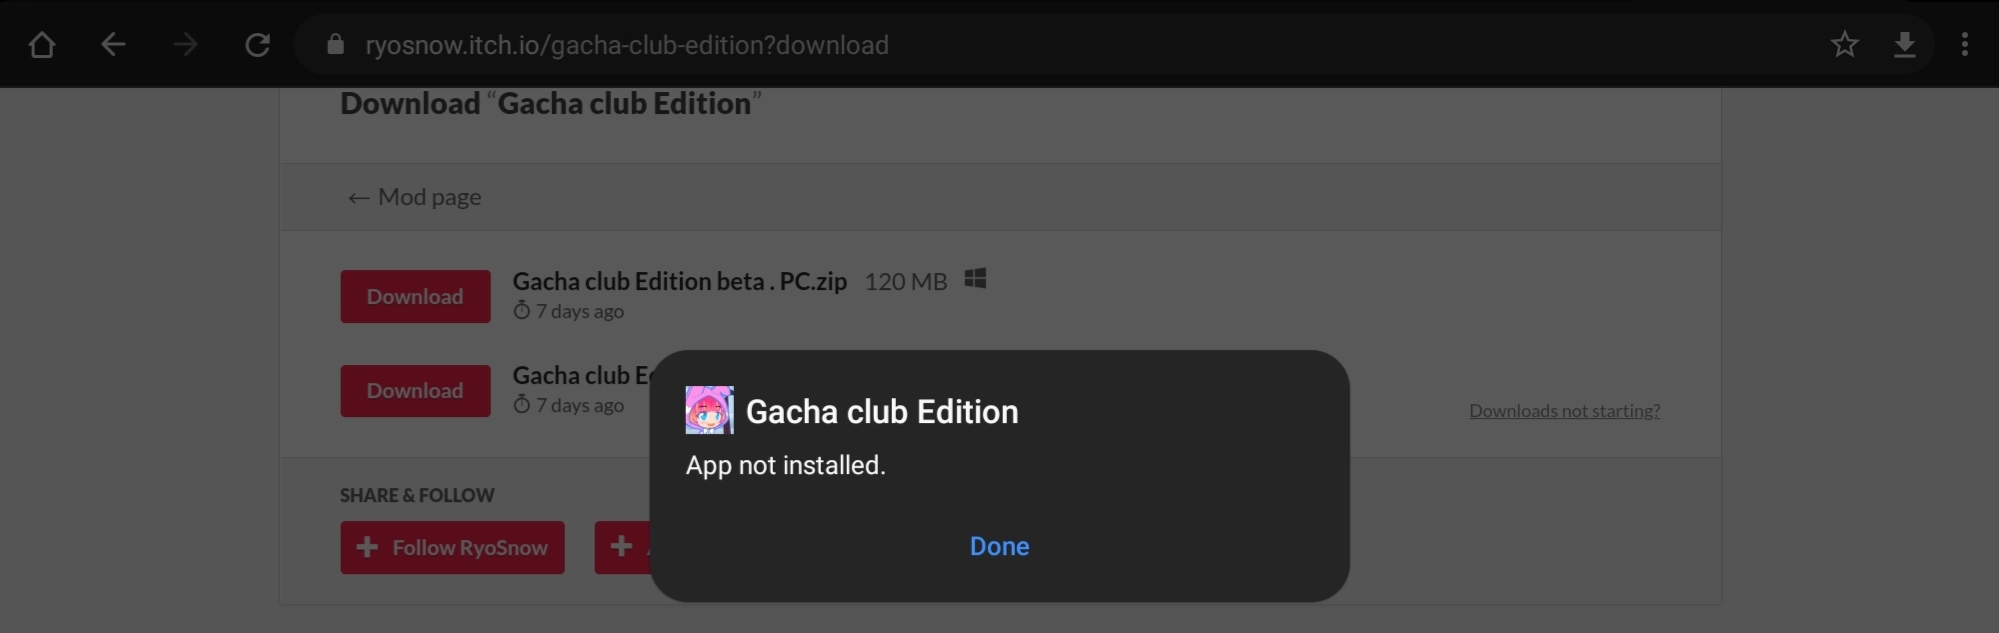 Comments 141 to 102 of 752 - Gacha club Edition by RyoSnow